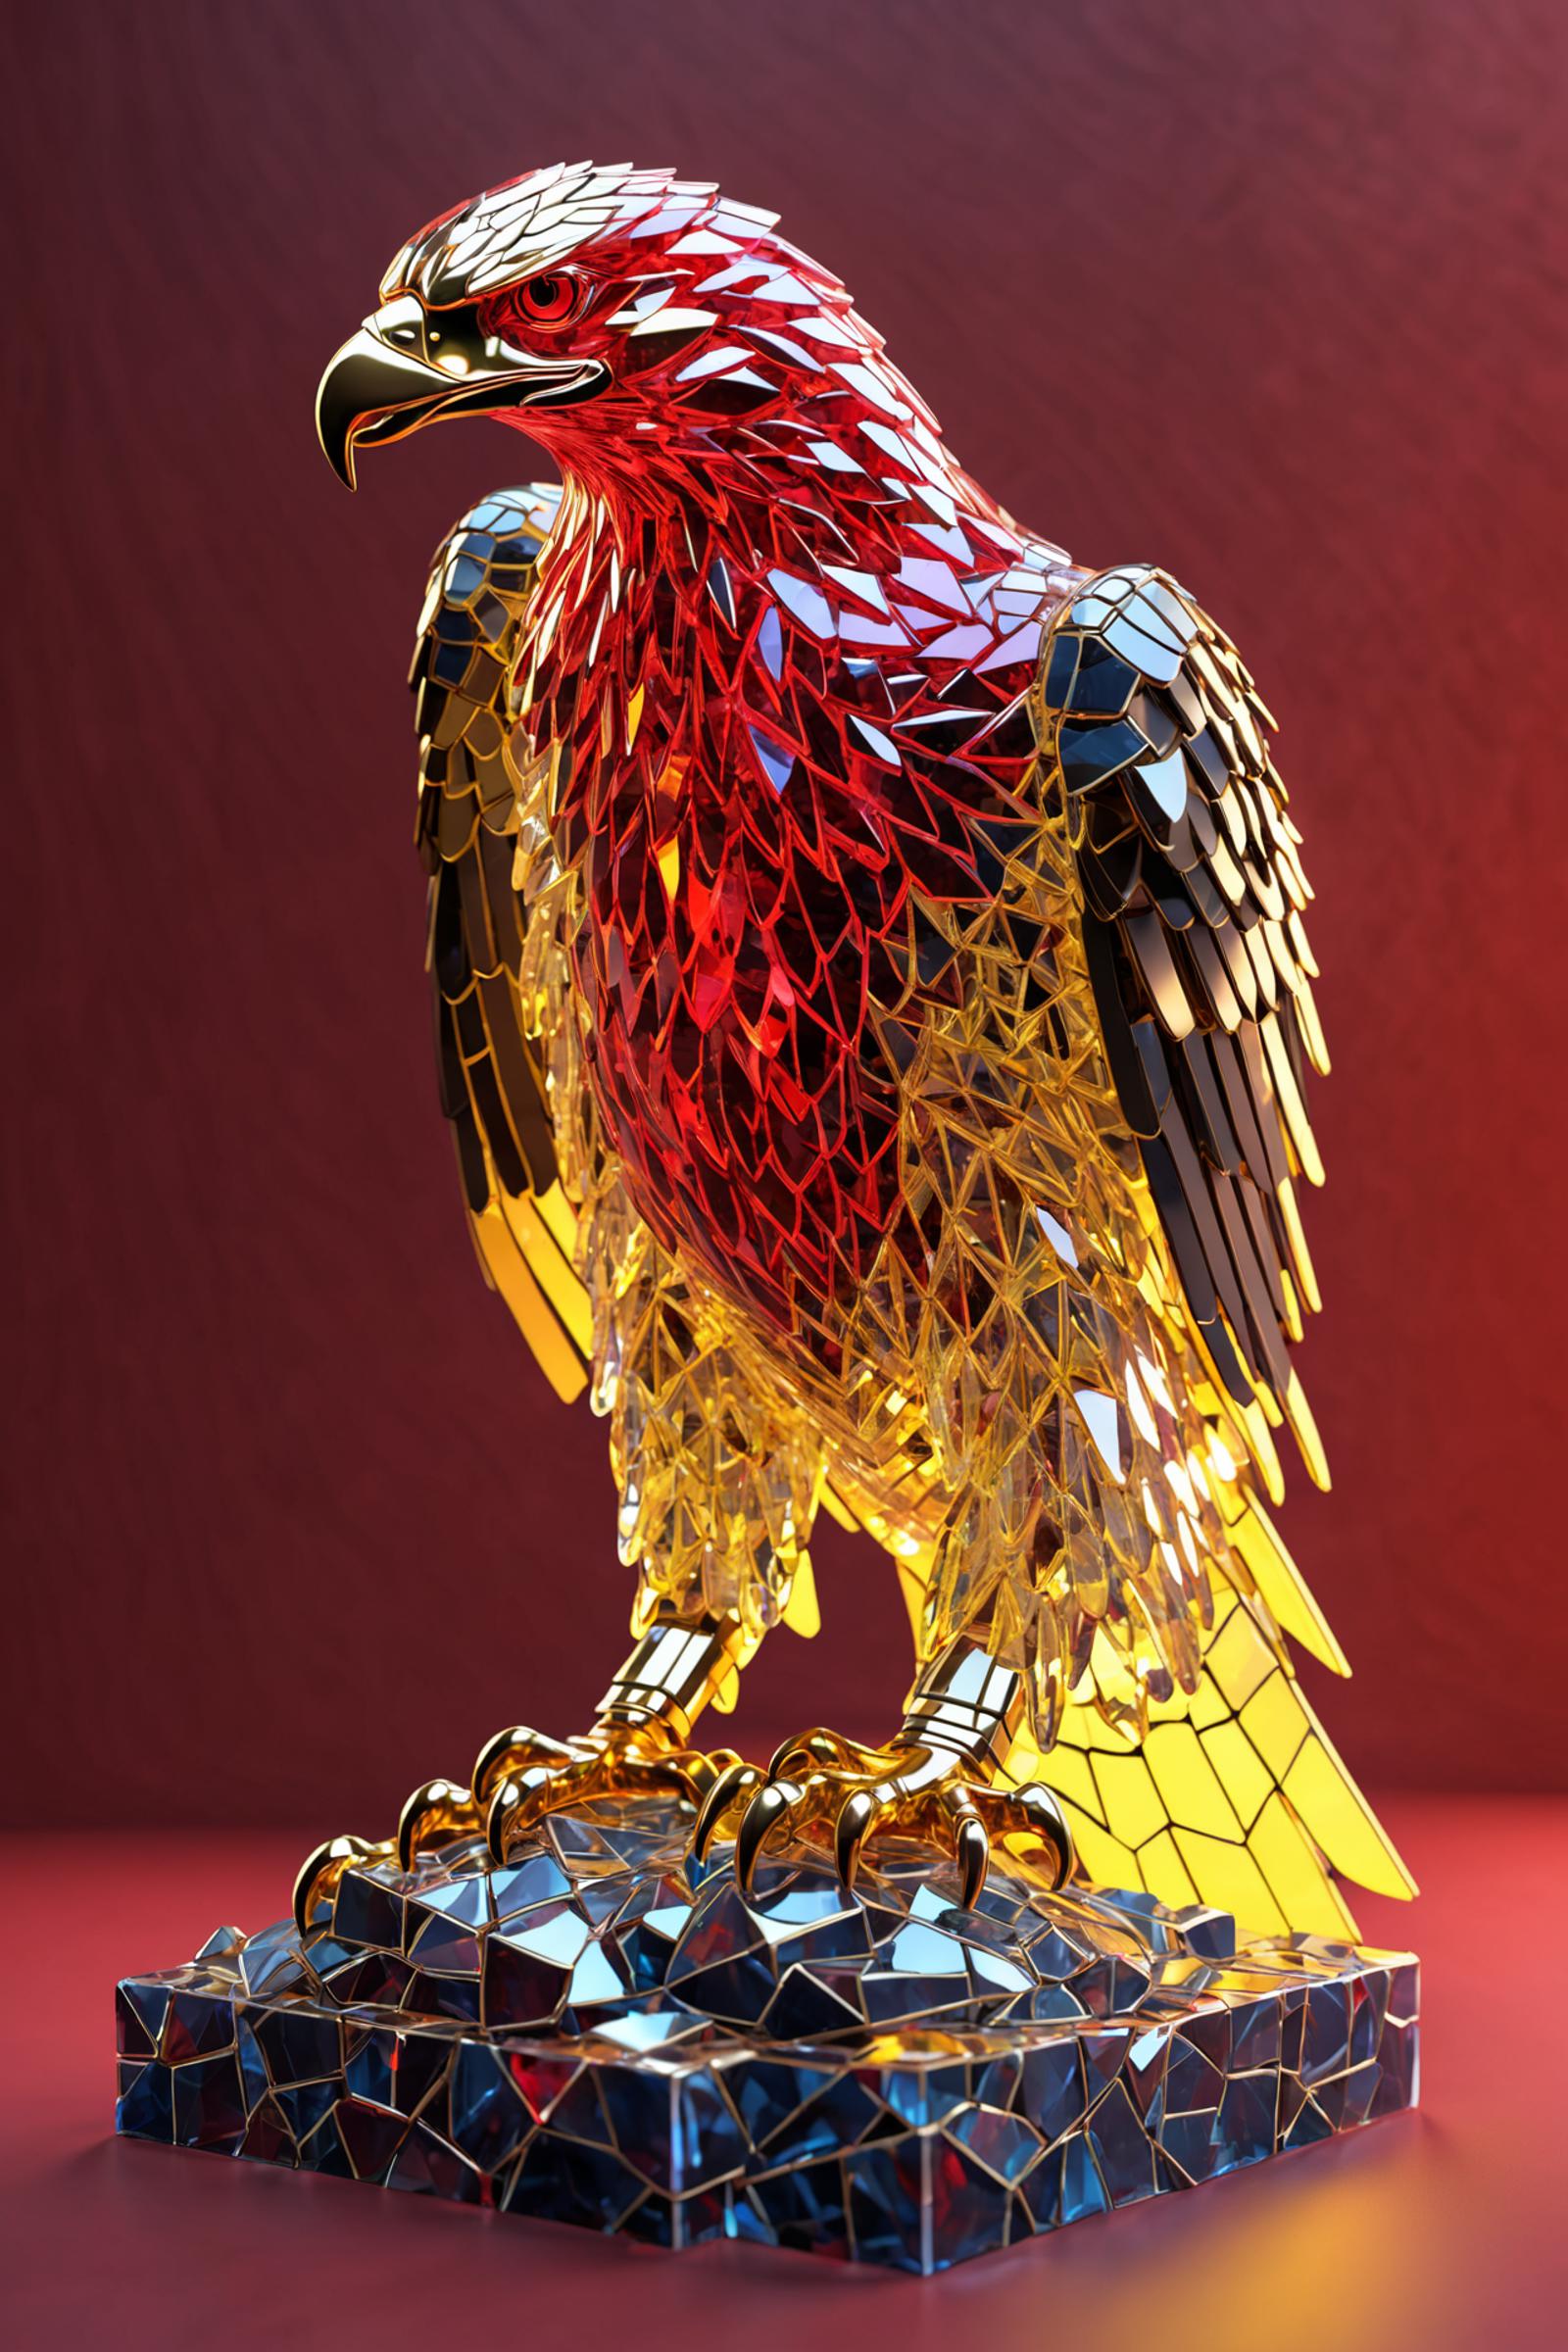 A golden bird statue with a red and gold body, sitting on a pile of mirrored glass.